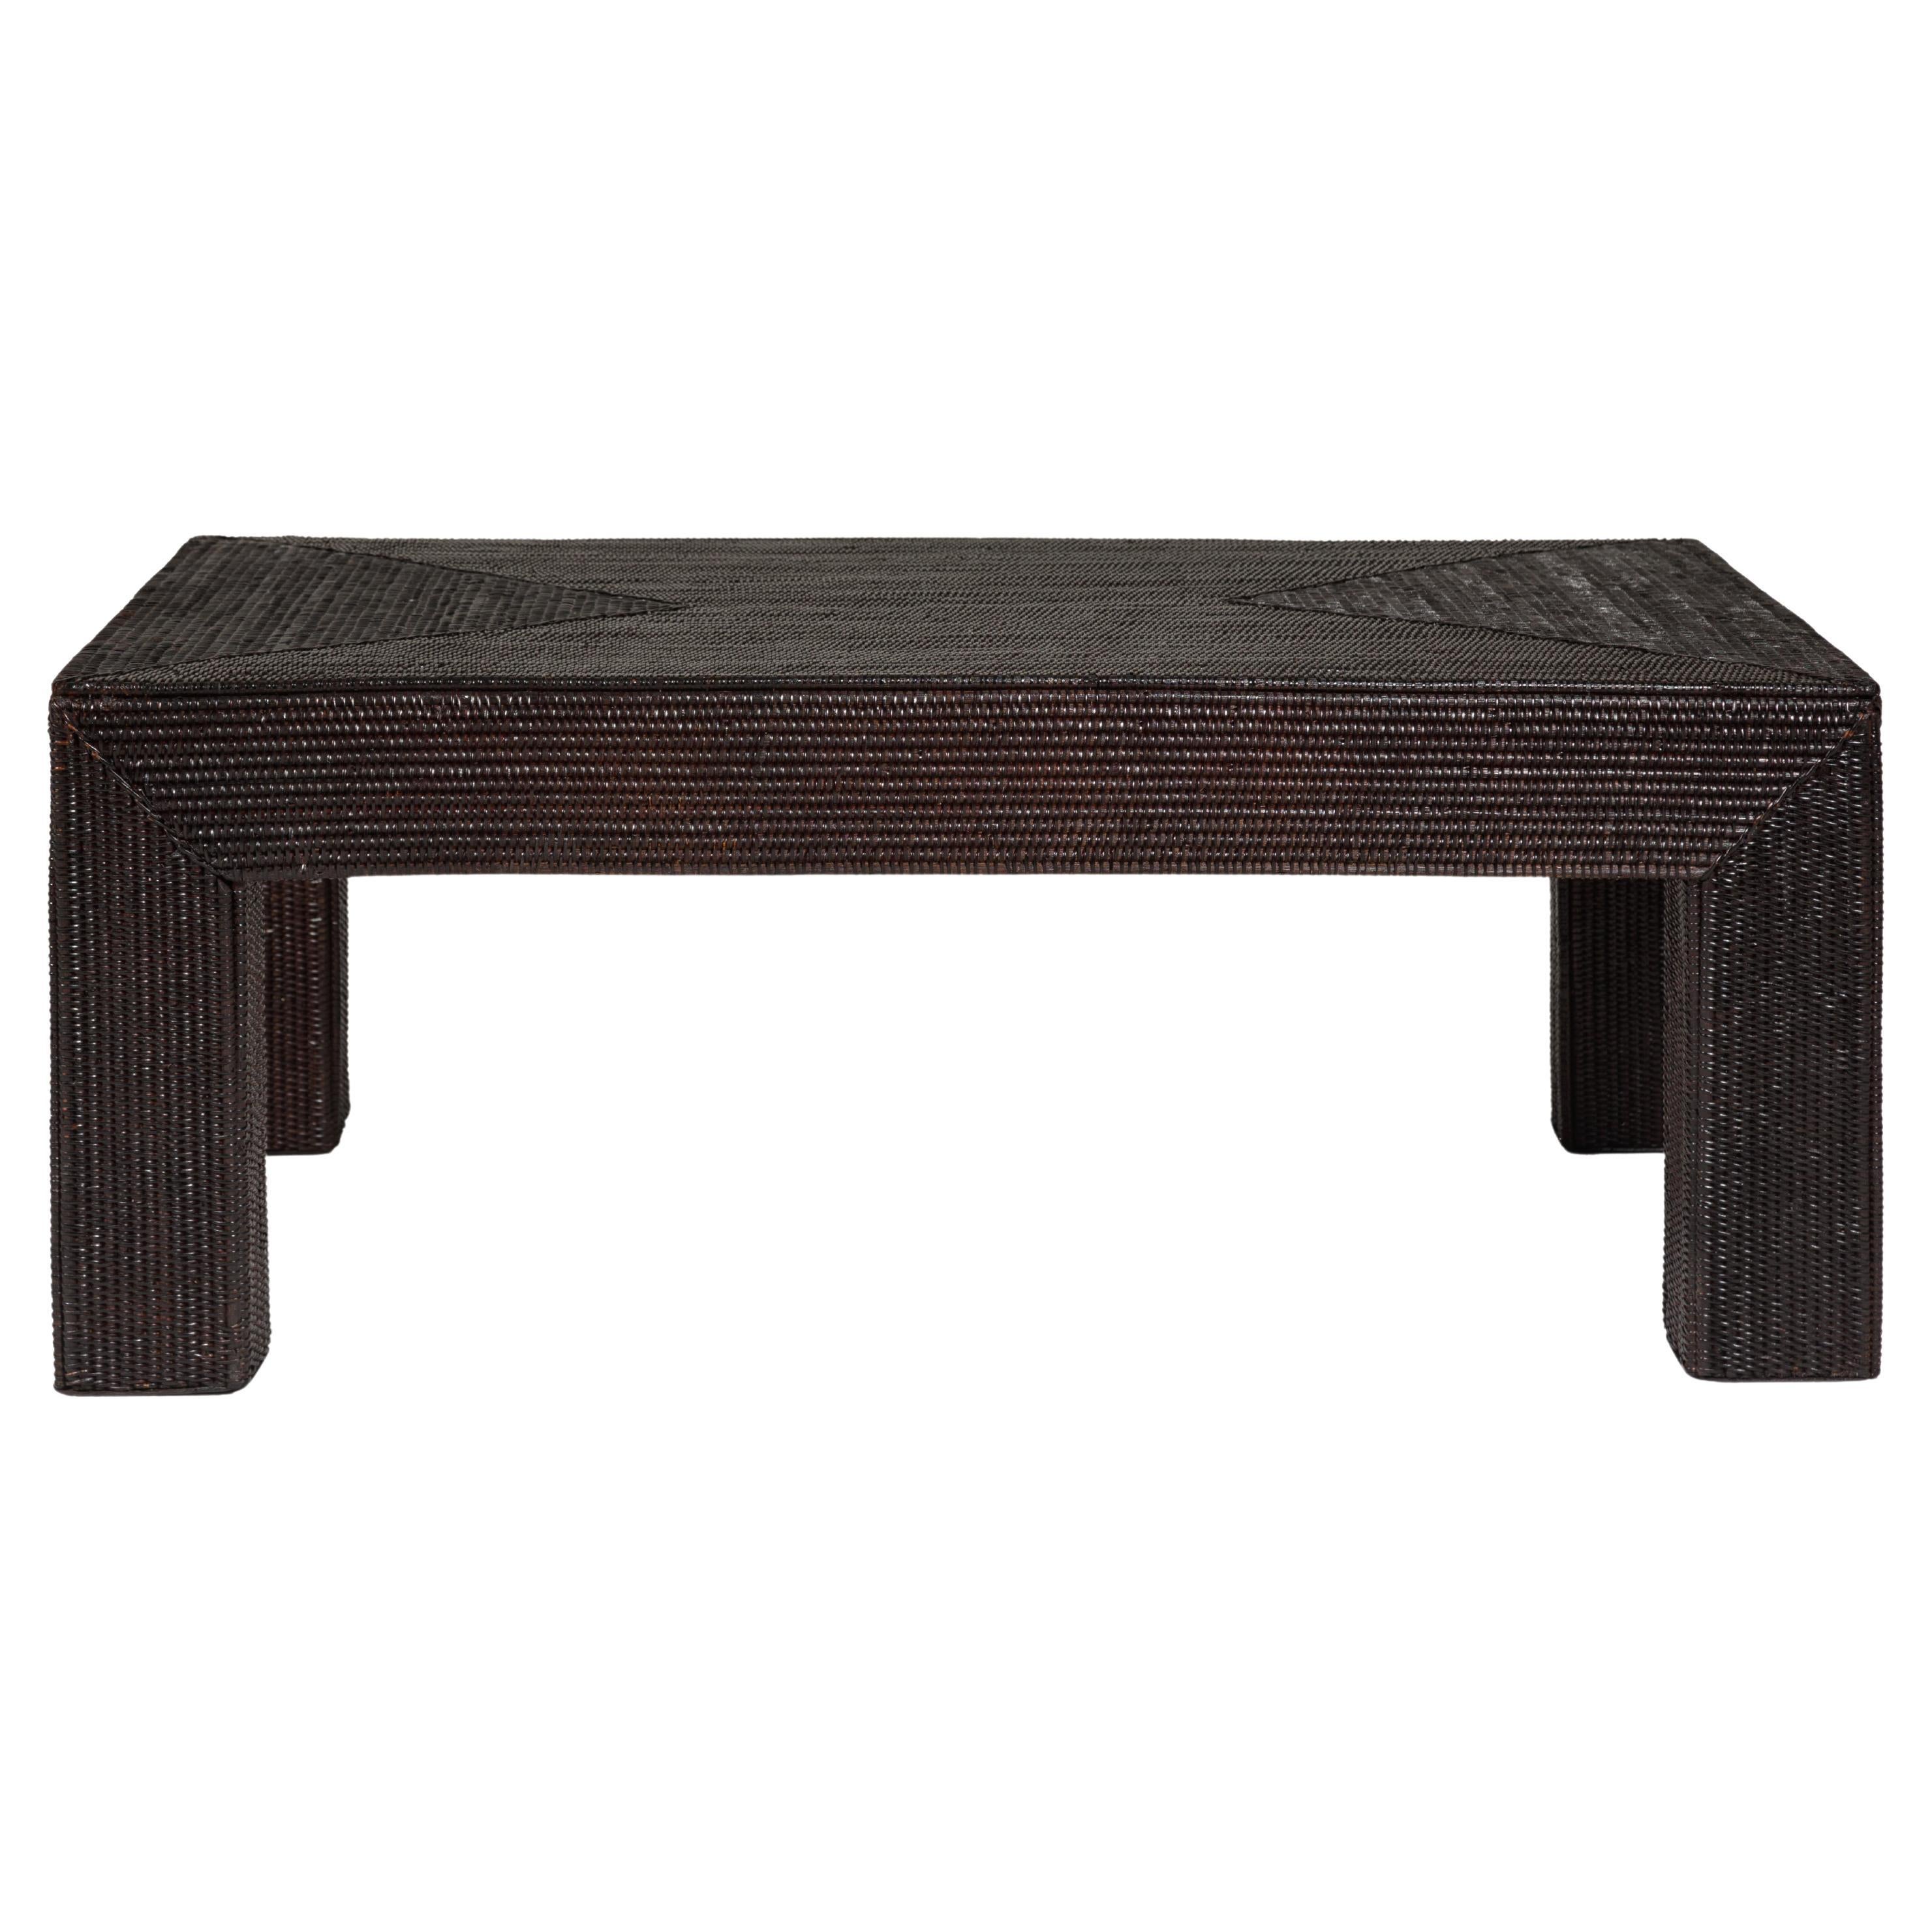 Woven Rattan Country Style Parsons Legs Coffee Table with Dark Brown Finish